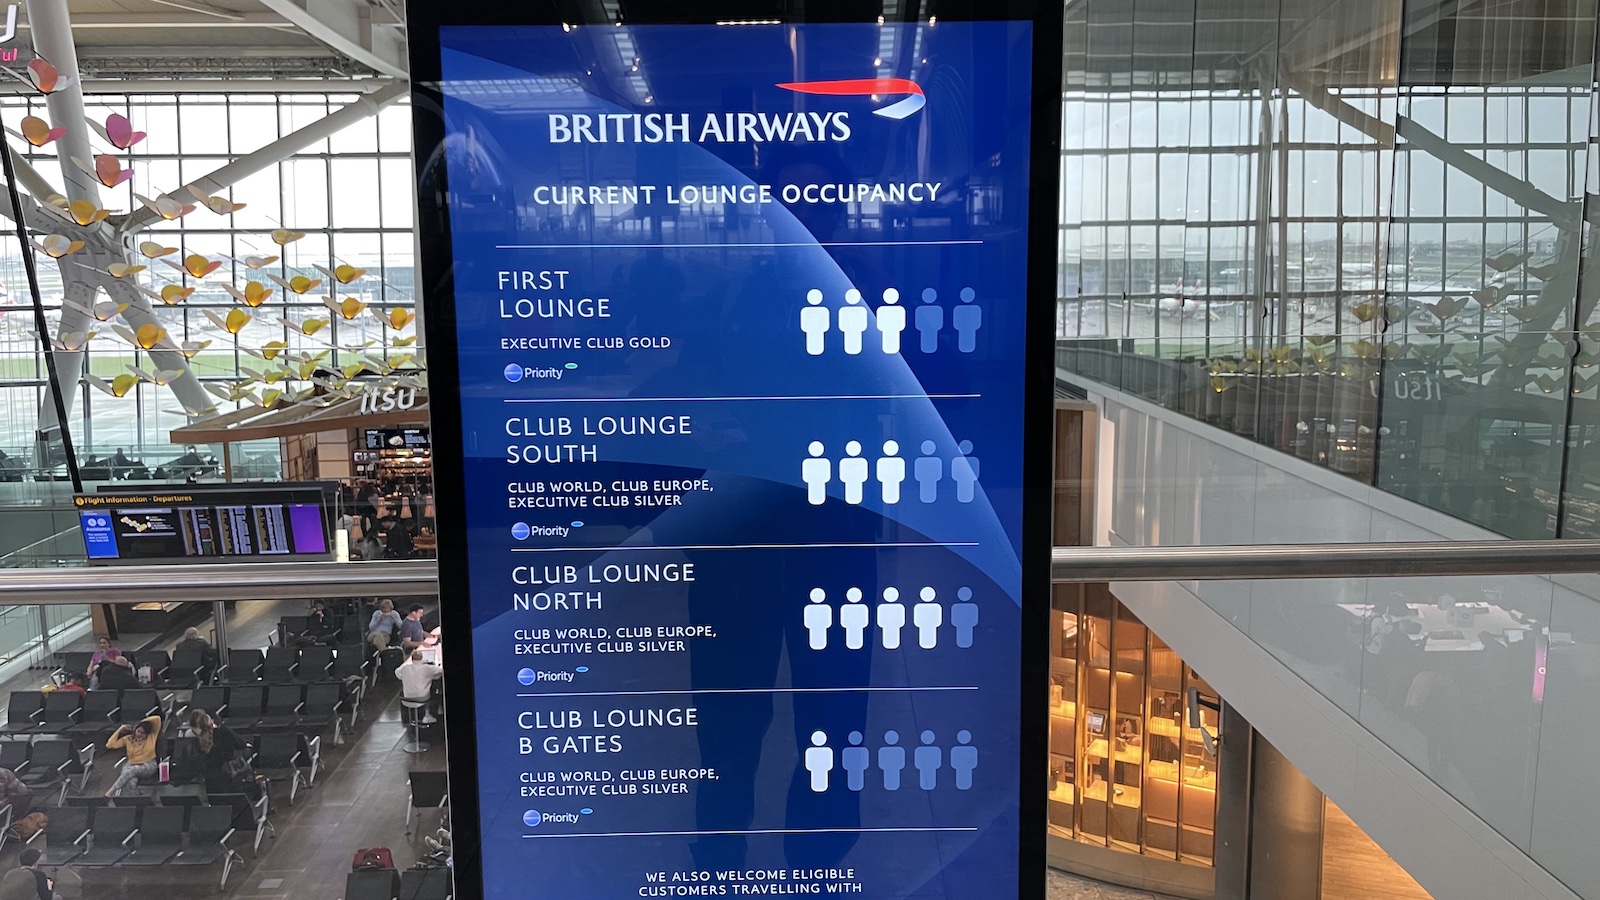 Heathrow Terminal Lounge Sign Showing Occupancy of British Airways Lounges